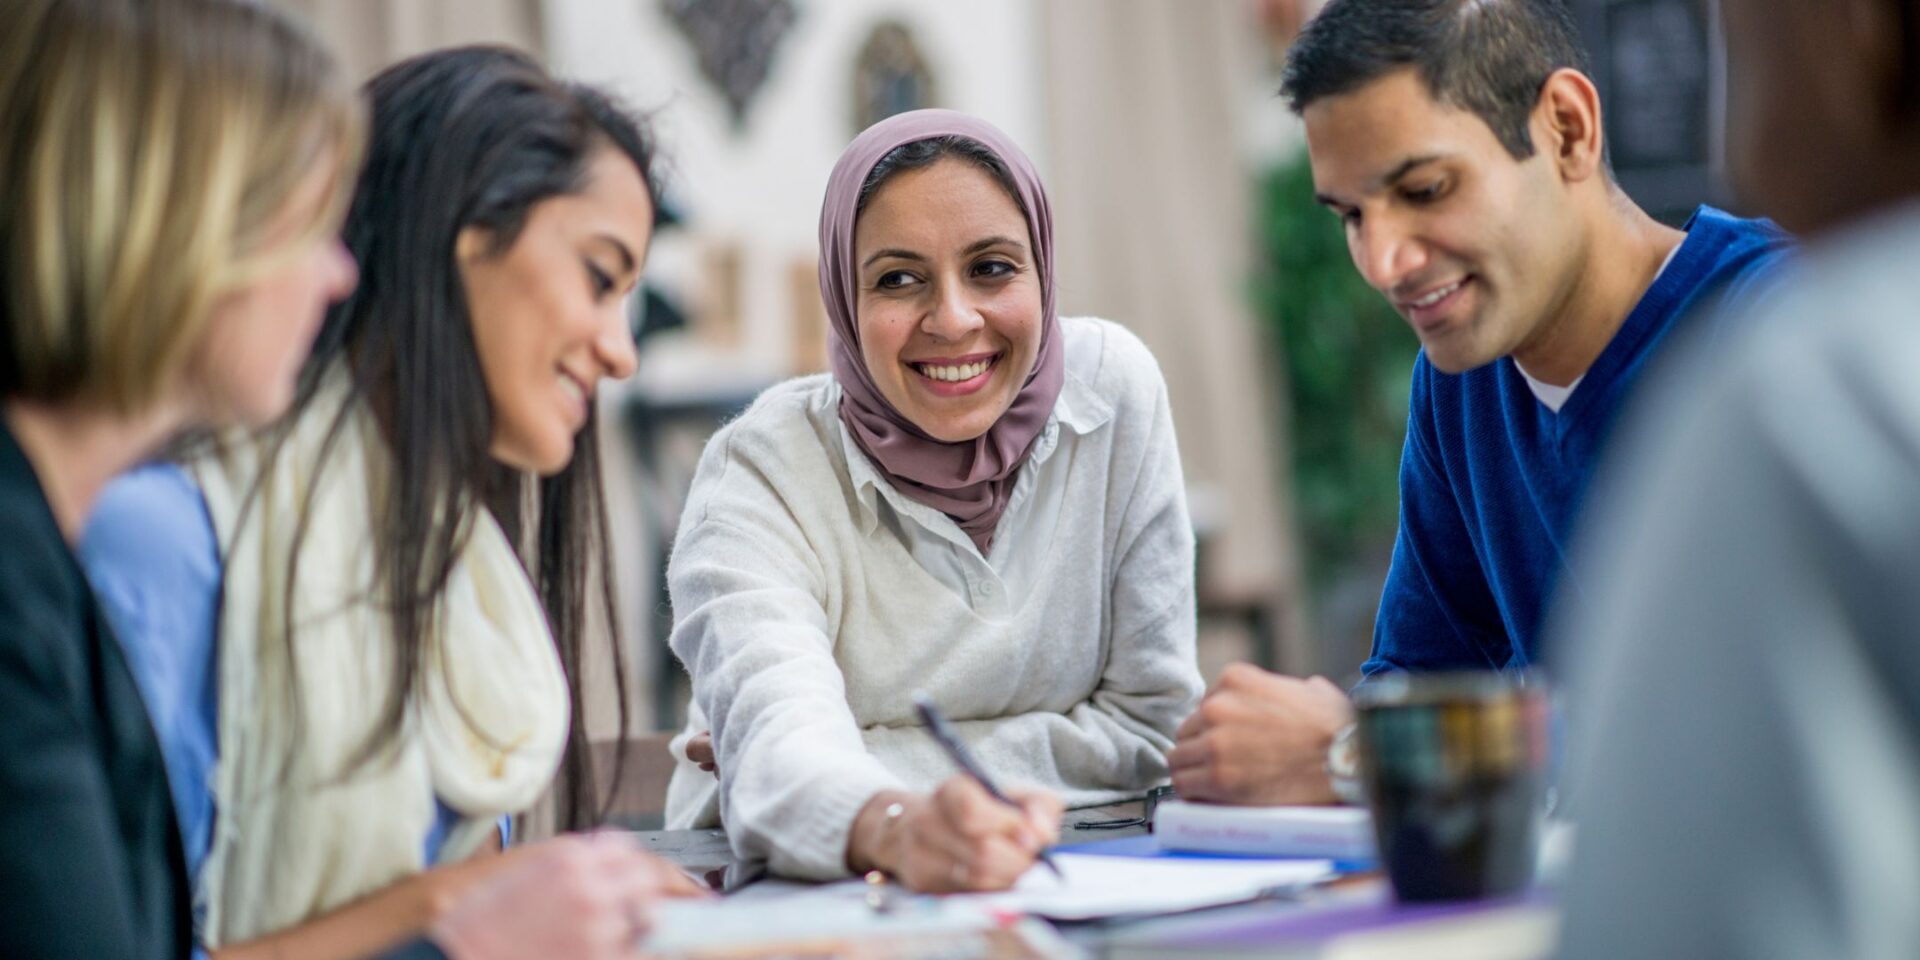 A woman wearing a hijab smiles widely as she speaks to a group sitting around a table. Photo for the art of articulation article.